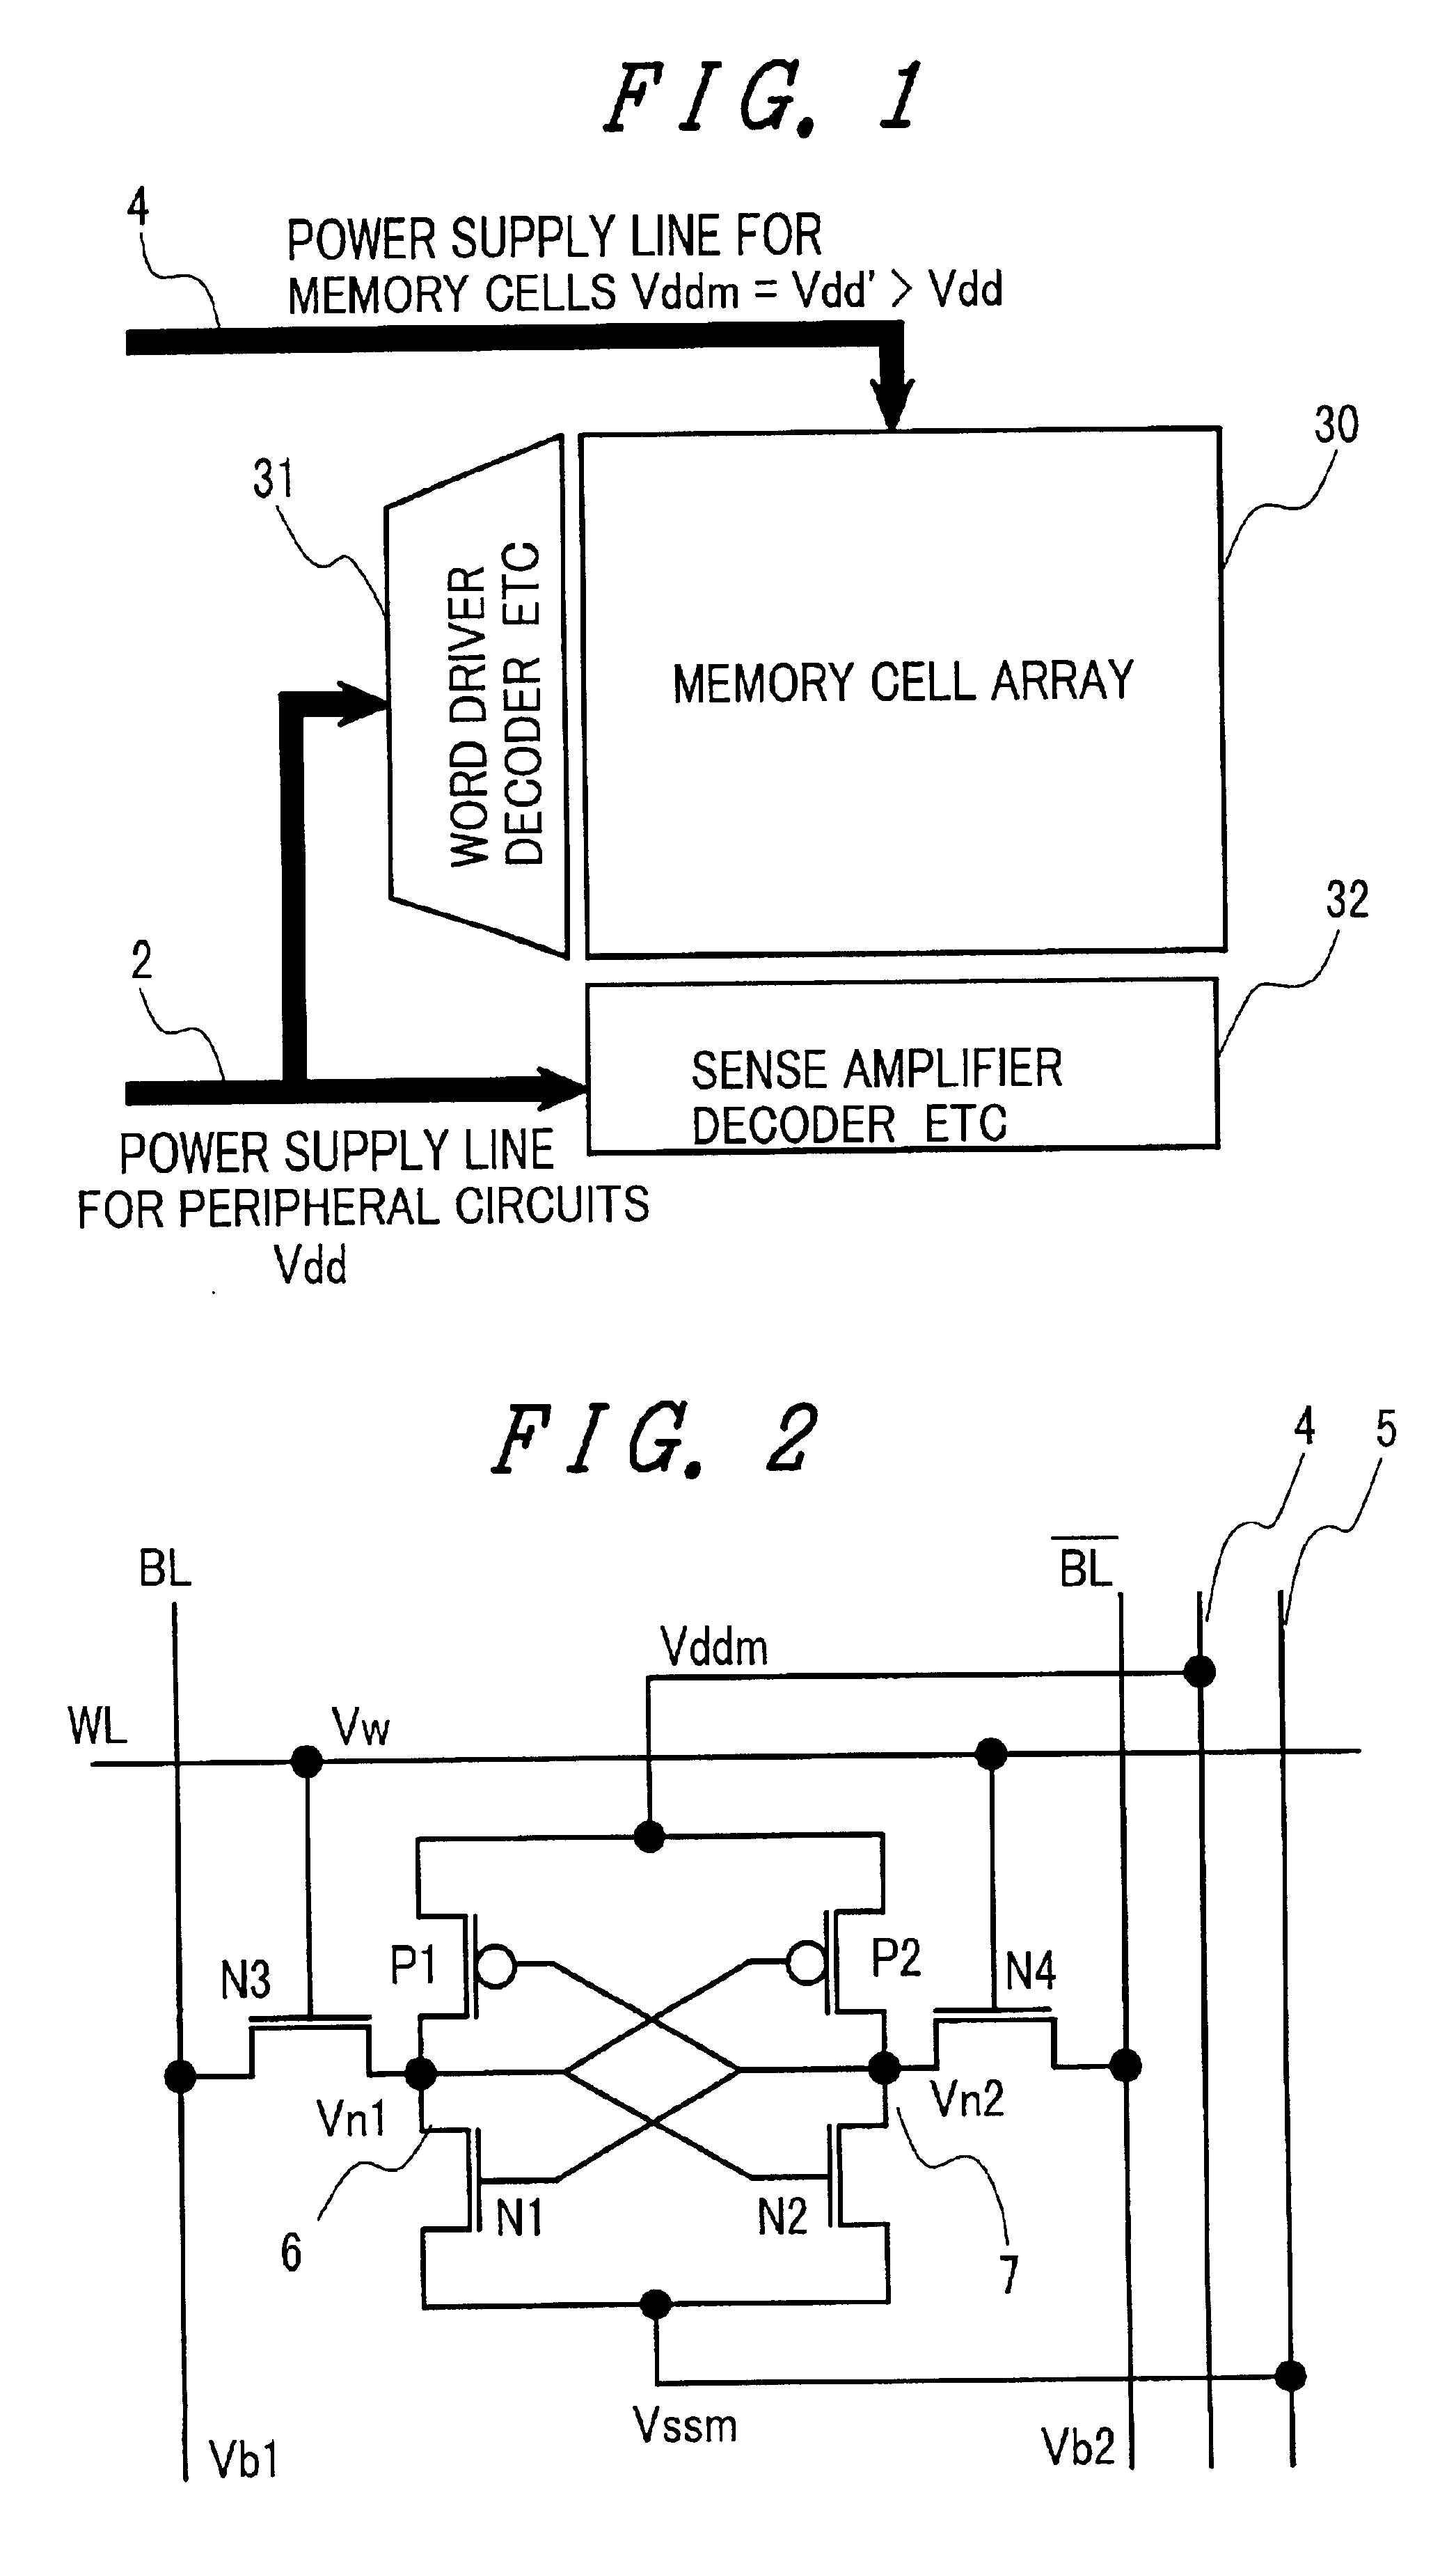 Semiconductor memory device with memory cells operated by boosted voltage